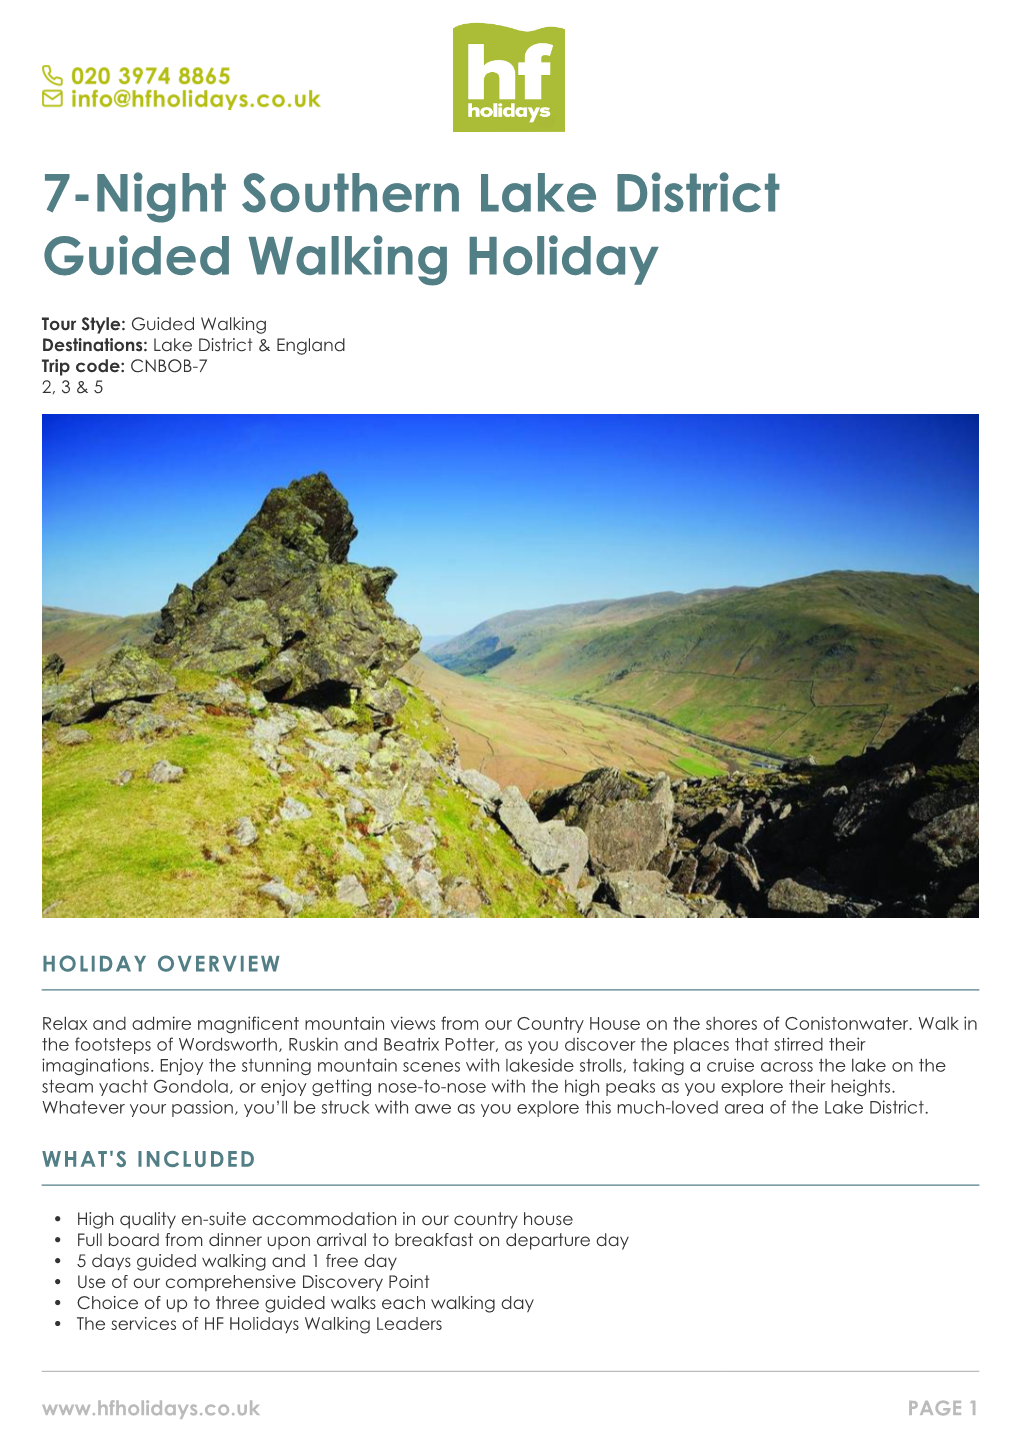 7-Night Southern Lake District Guided Walking Holiday